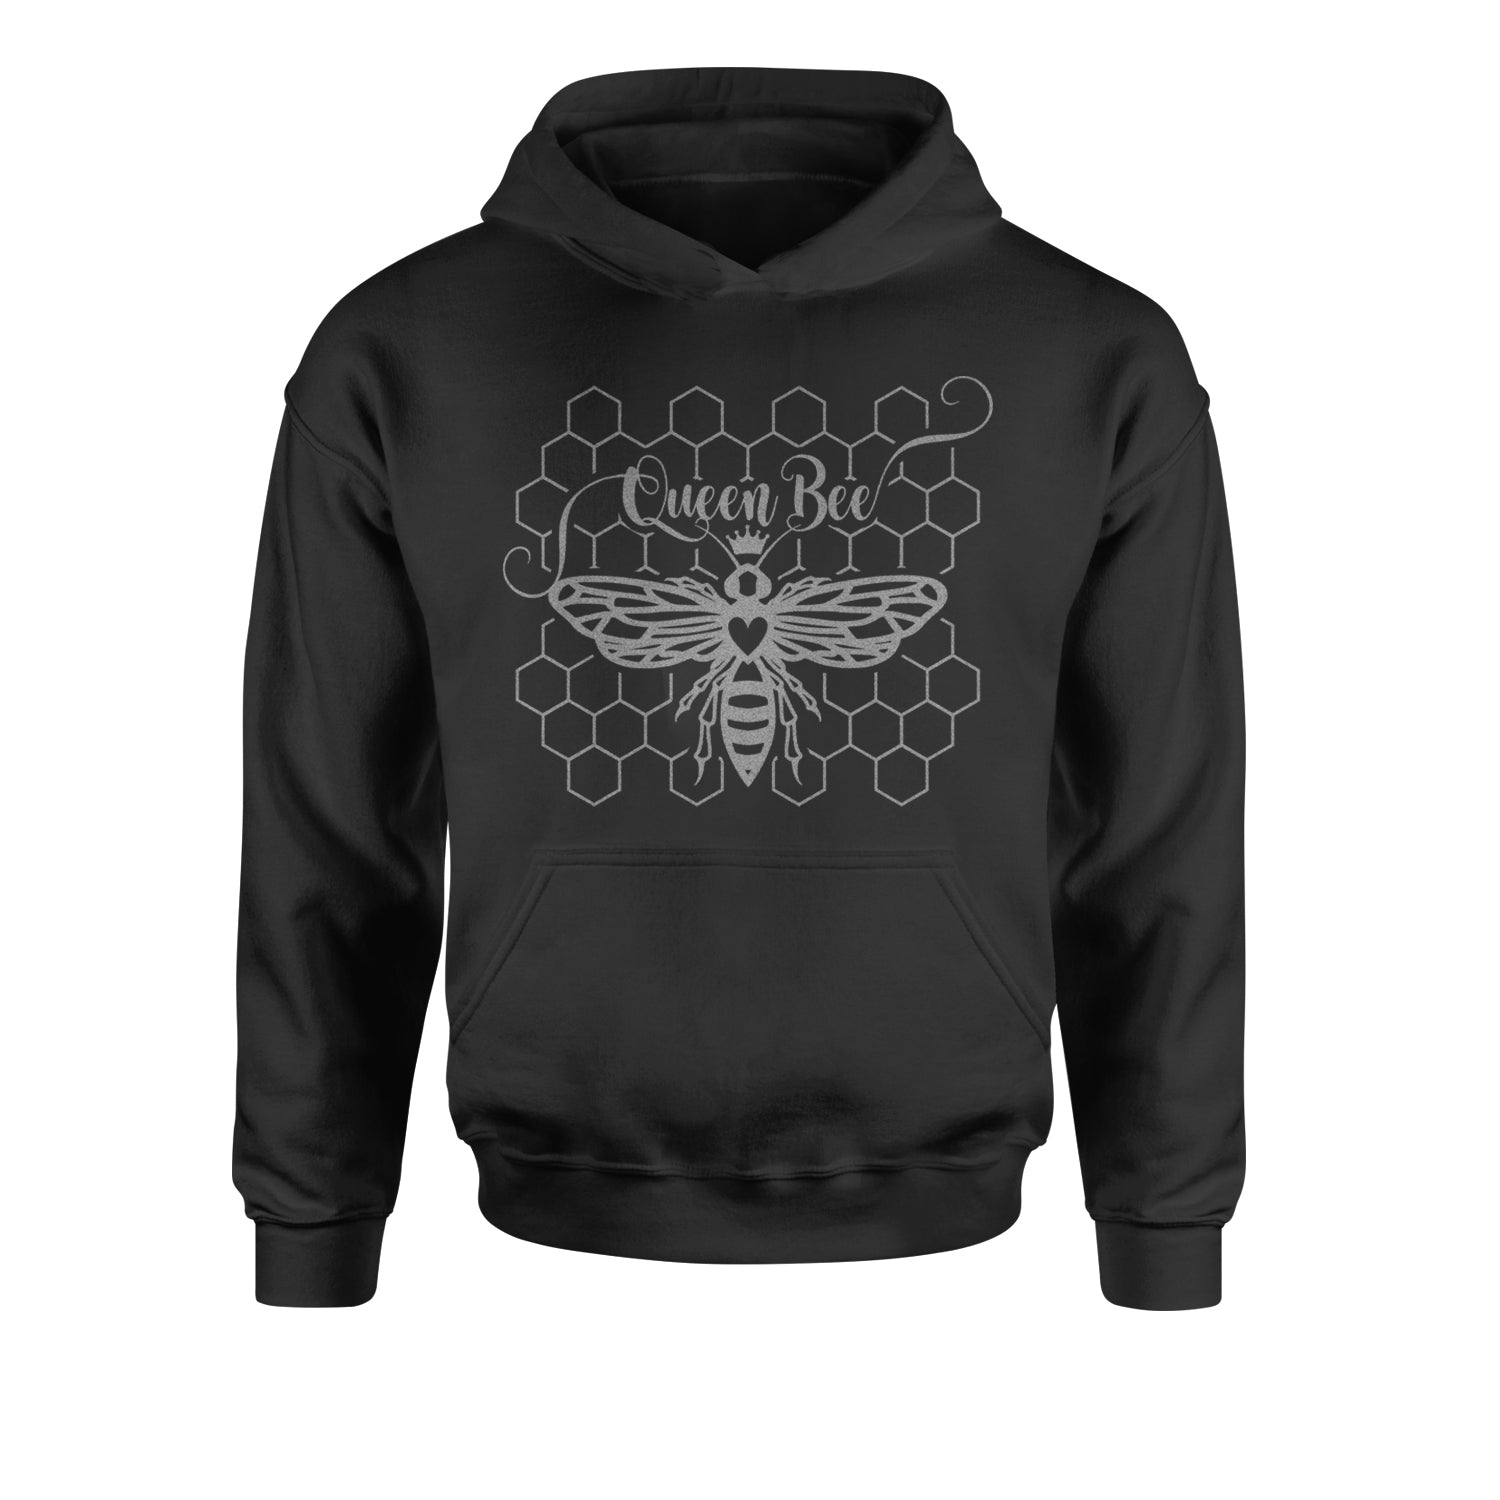 Beehive Queen Bee Metallic Silver Witty Bee Hive Design Youth-Sized Hoodie